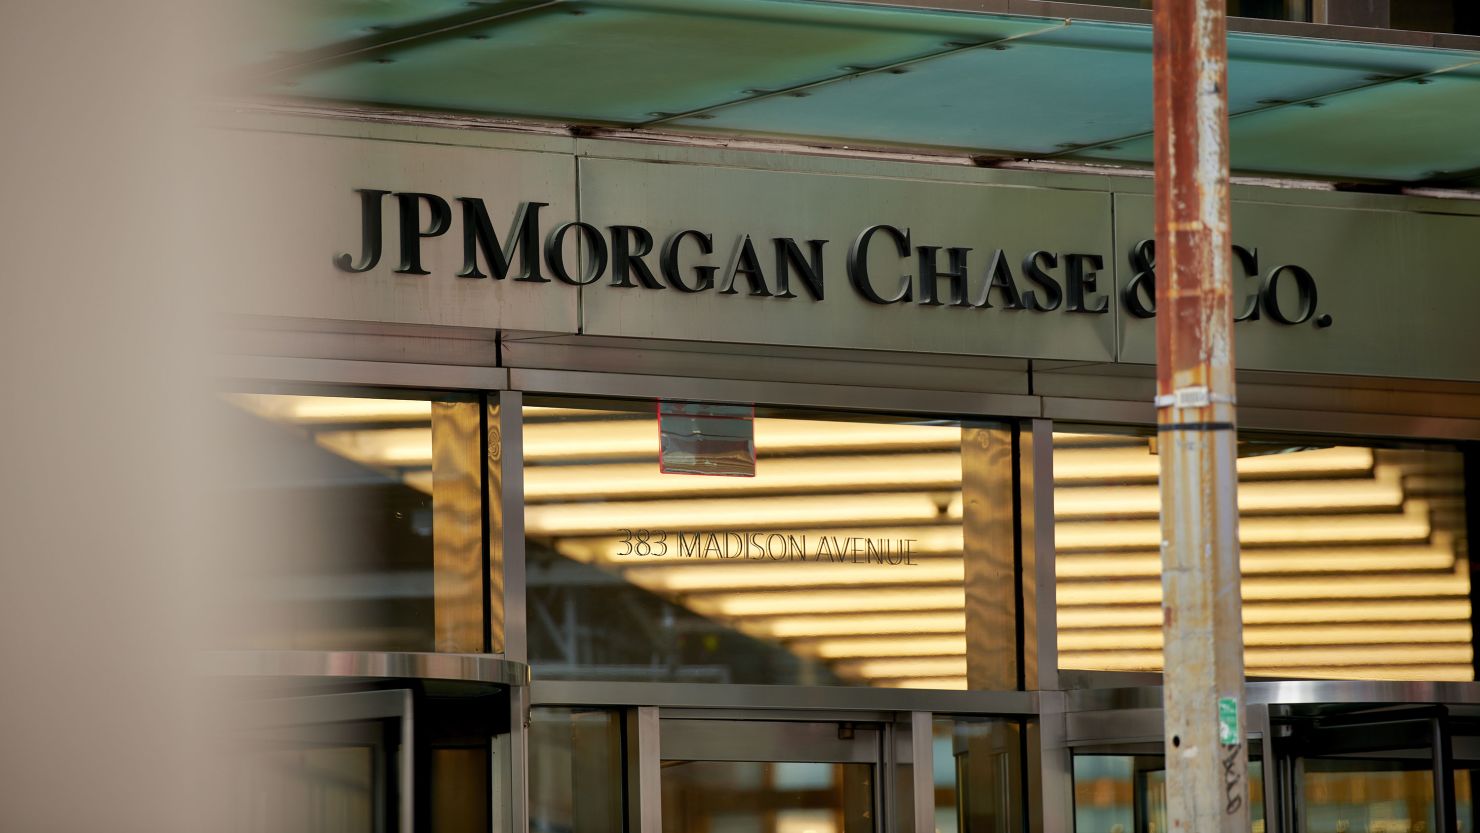 JPMorgan Chase & Co. headquarters in New York, US, on Wednesday, Jan. 18, 2023. JPMorgan Chase & Co., the biggest US bank, said this year's net interest income will be lower than analysts expected as the economy shows signs of slippage. Photographer: Gabby Jones/Bloomberg via Getty Images